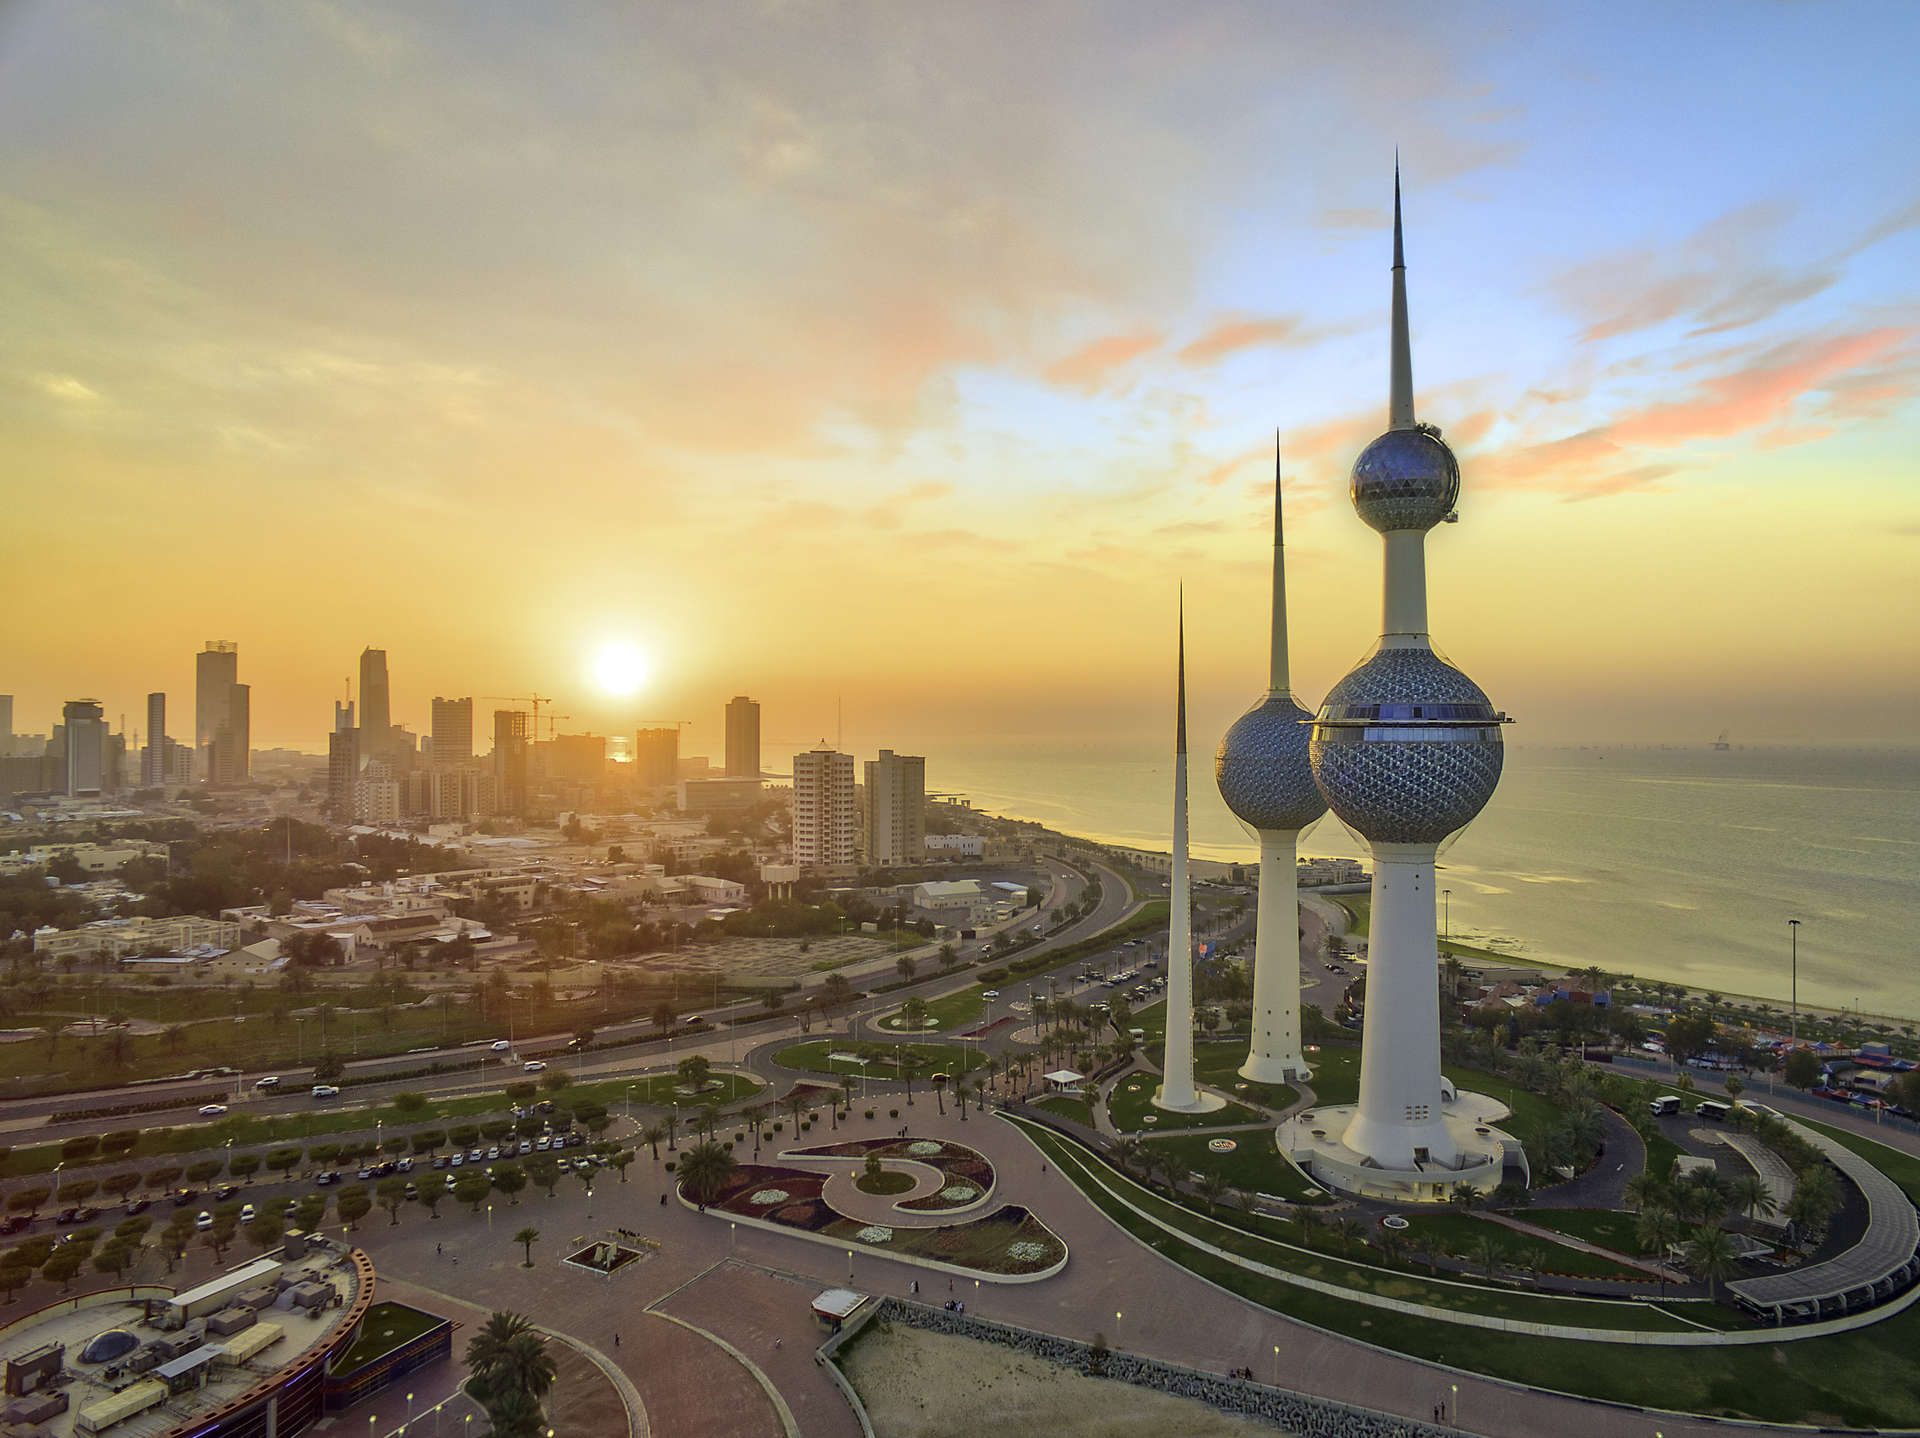 Head up to the Kuwait Towers viewing deck, 123 metres above the city, for fantastic views of the Gulf shore and the capital itself